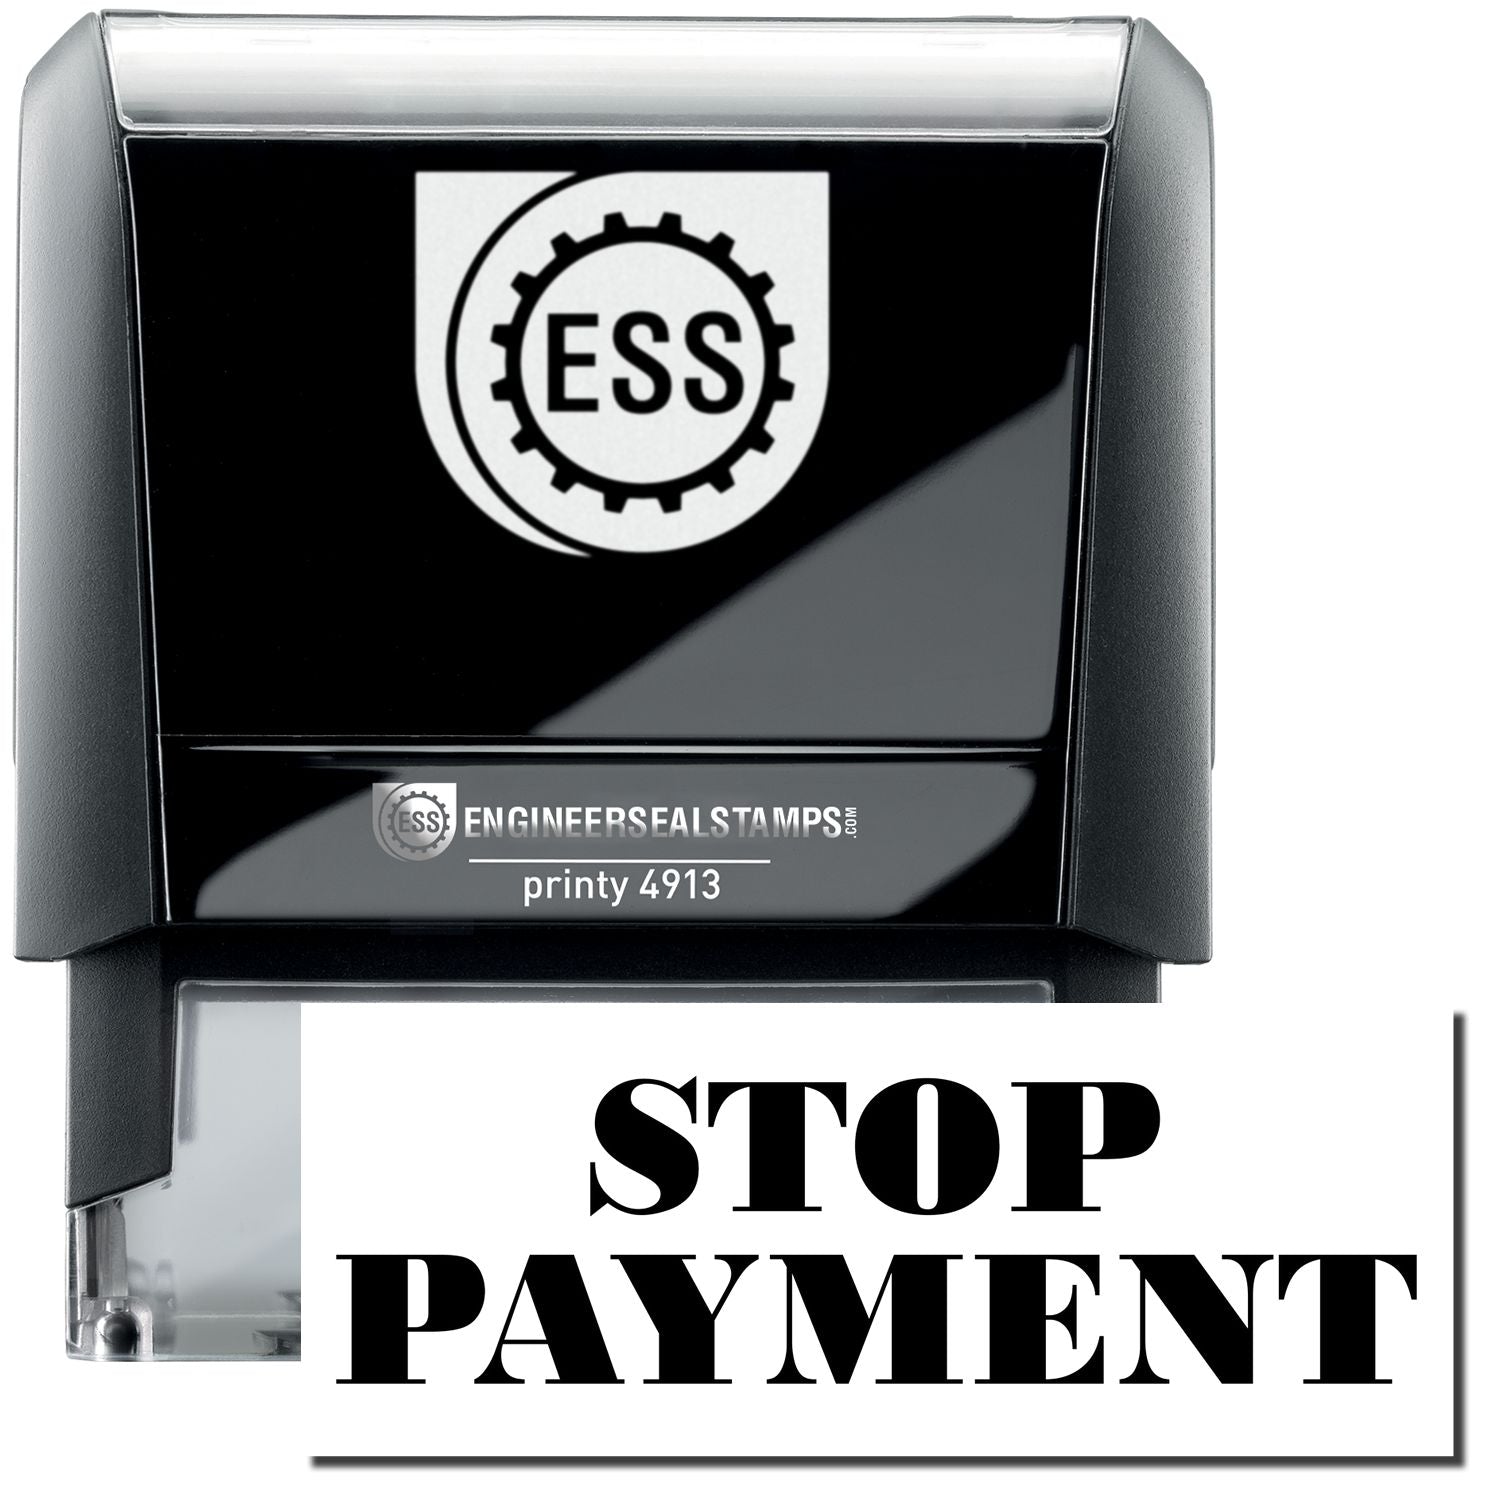 A self-inking stamp with a stamped image showing how the text "STOP PAYMENT" in a large bold font is displayed by it.